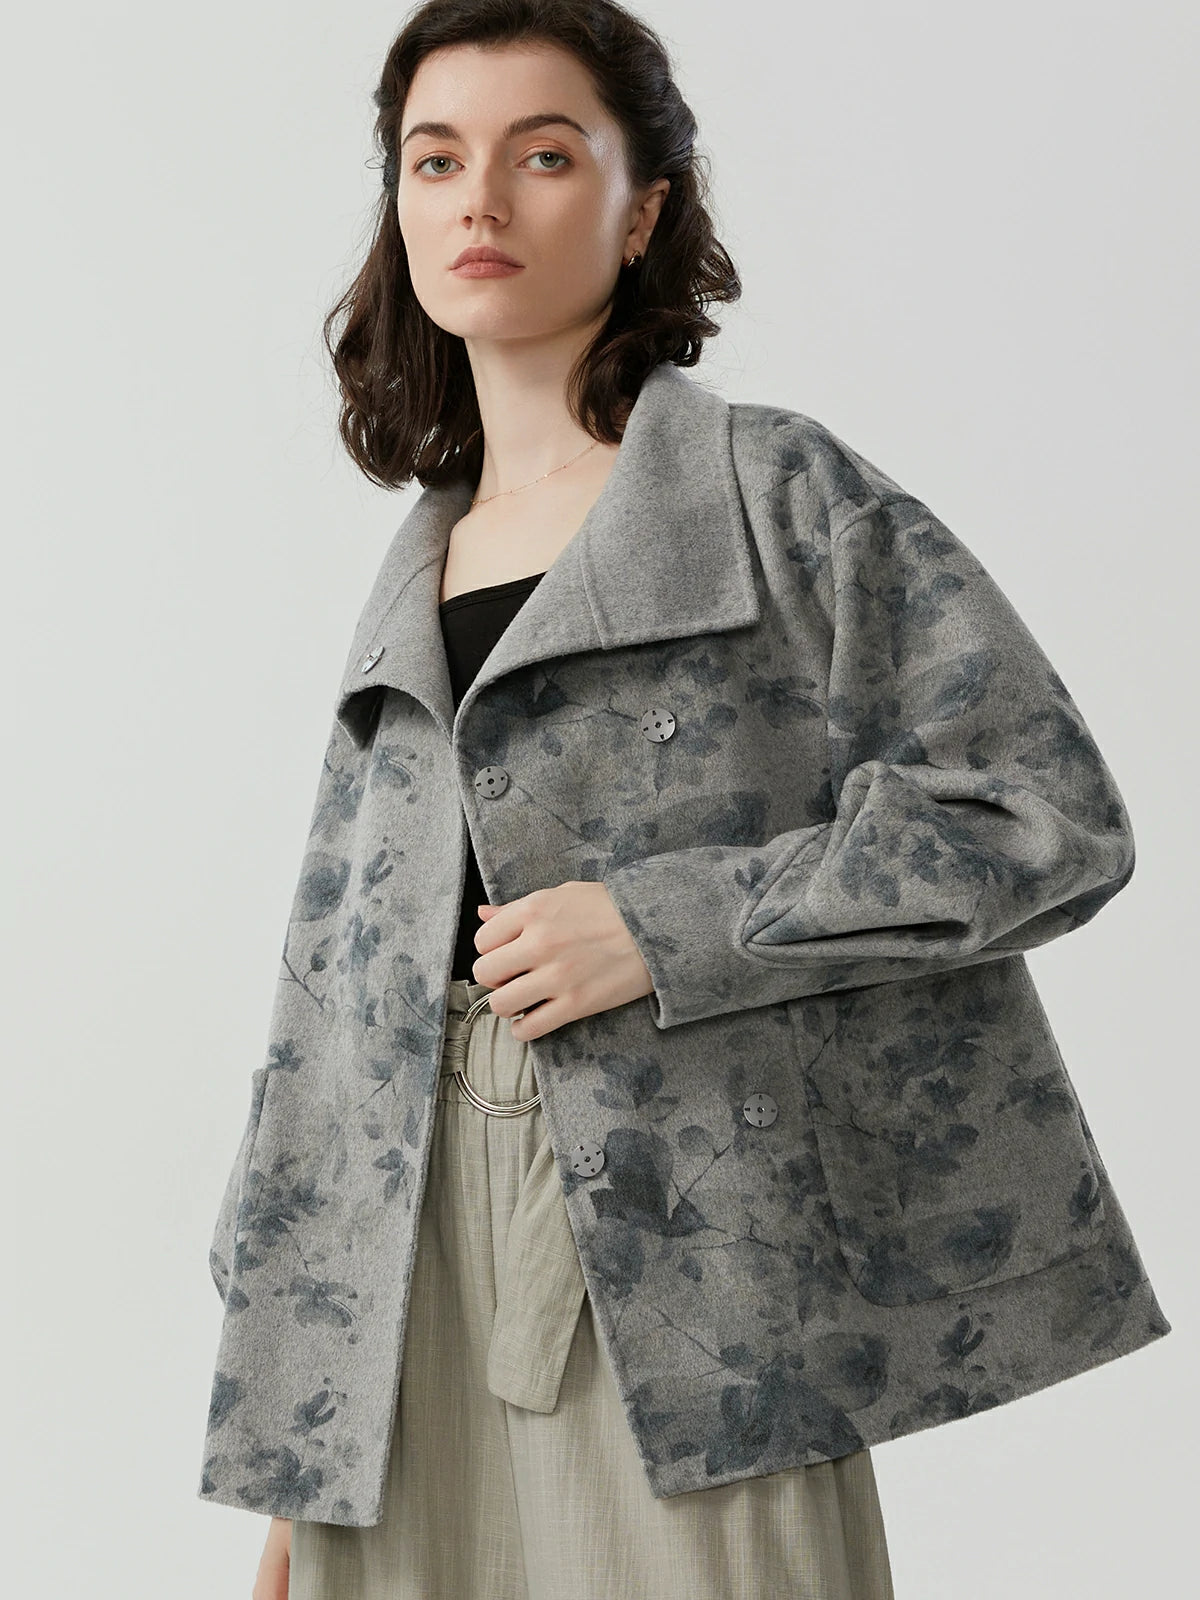 Artistic grey printed pattern design jacket for a unique and fashionable women&#39;s wear choice